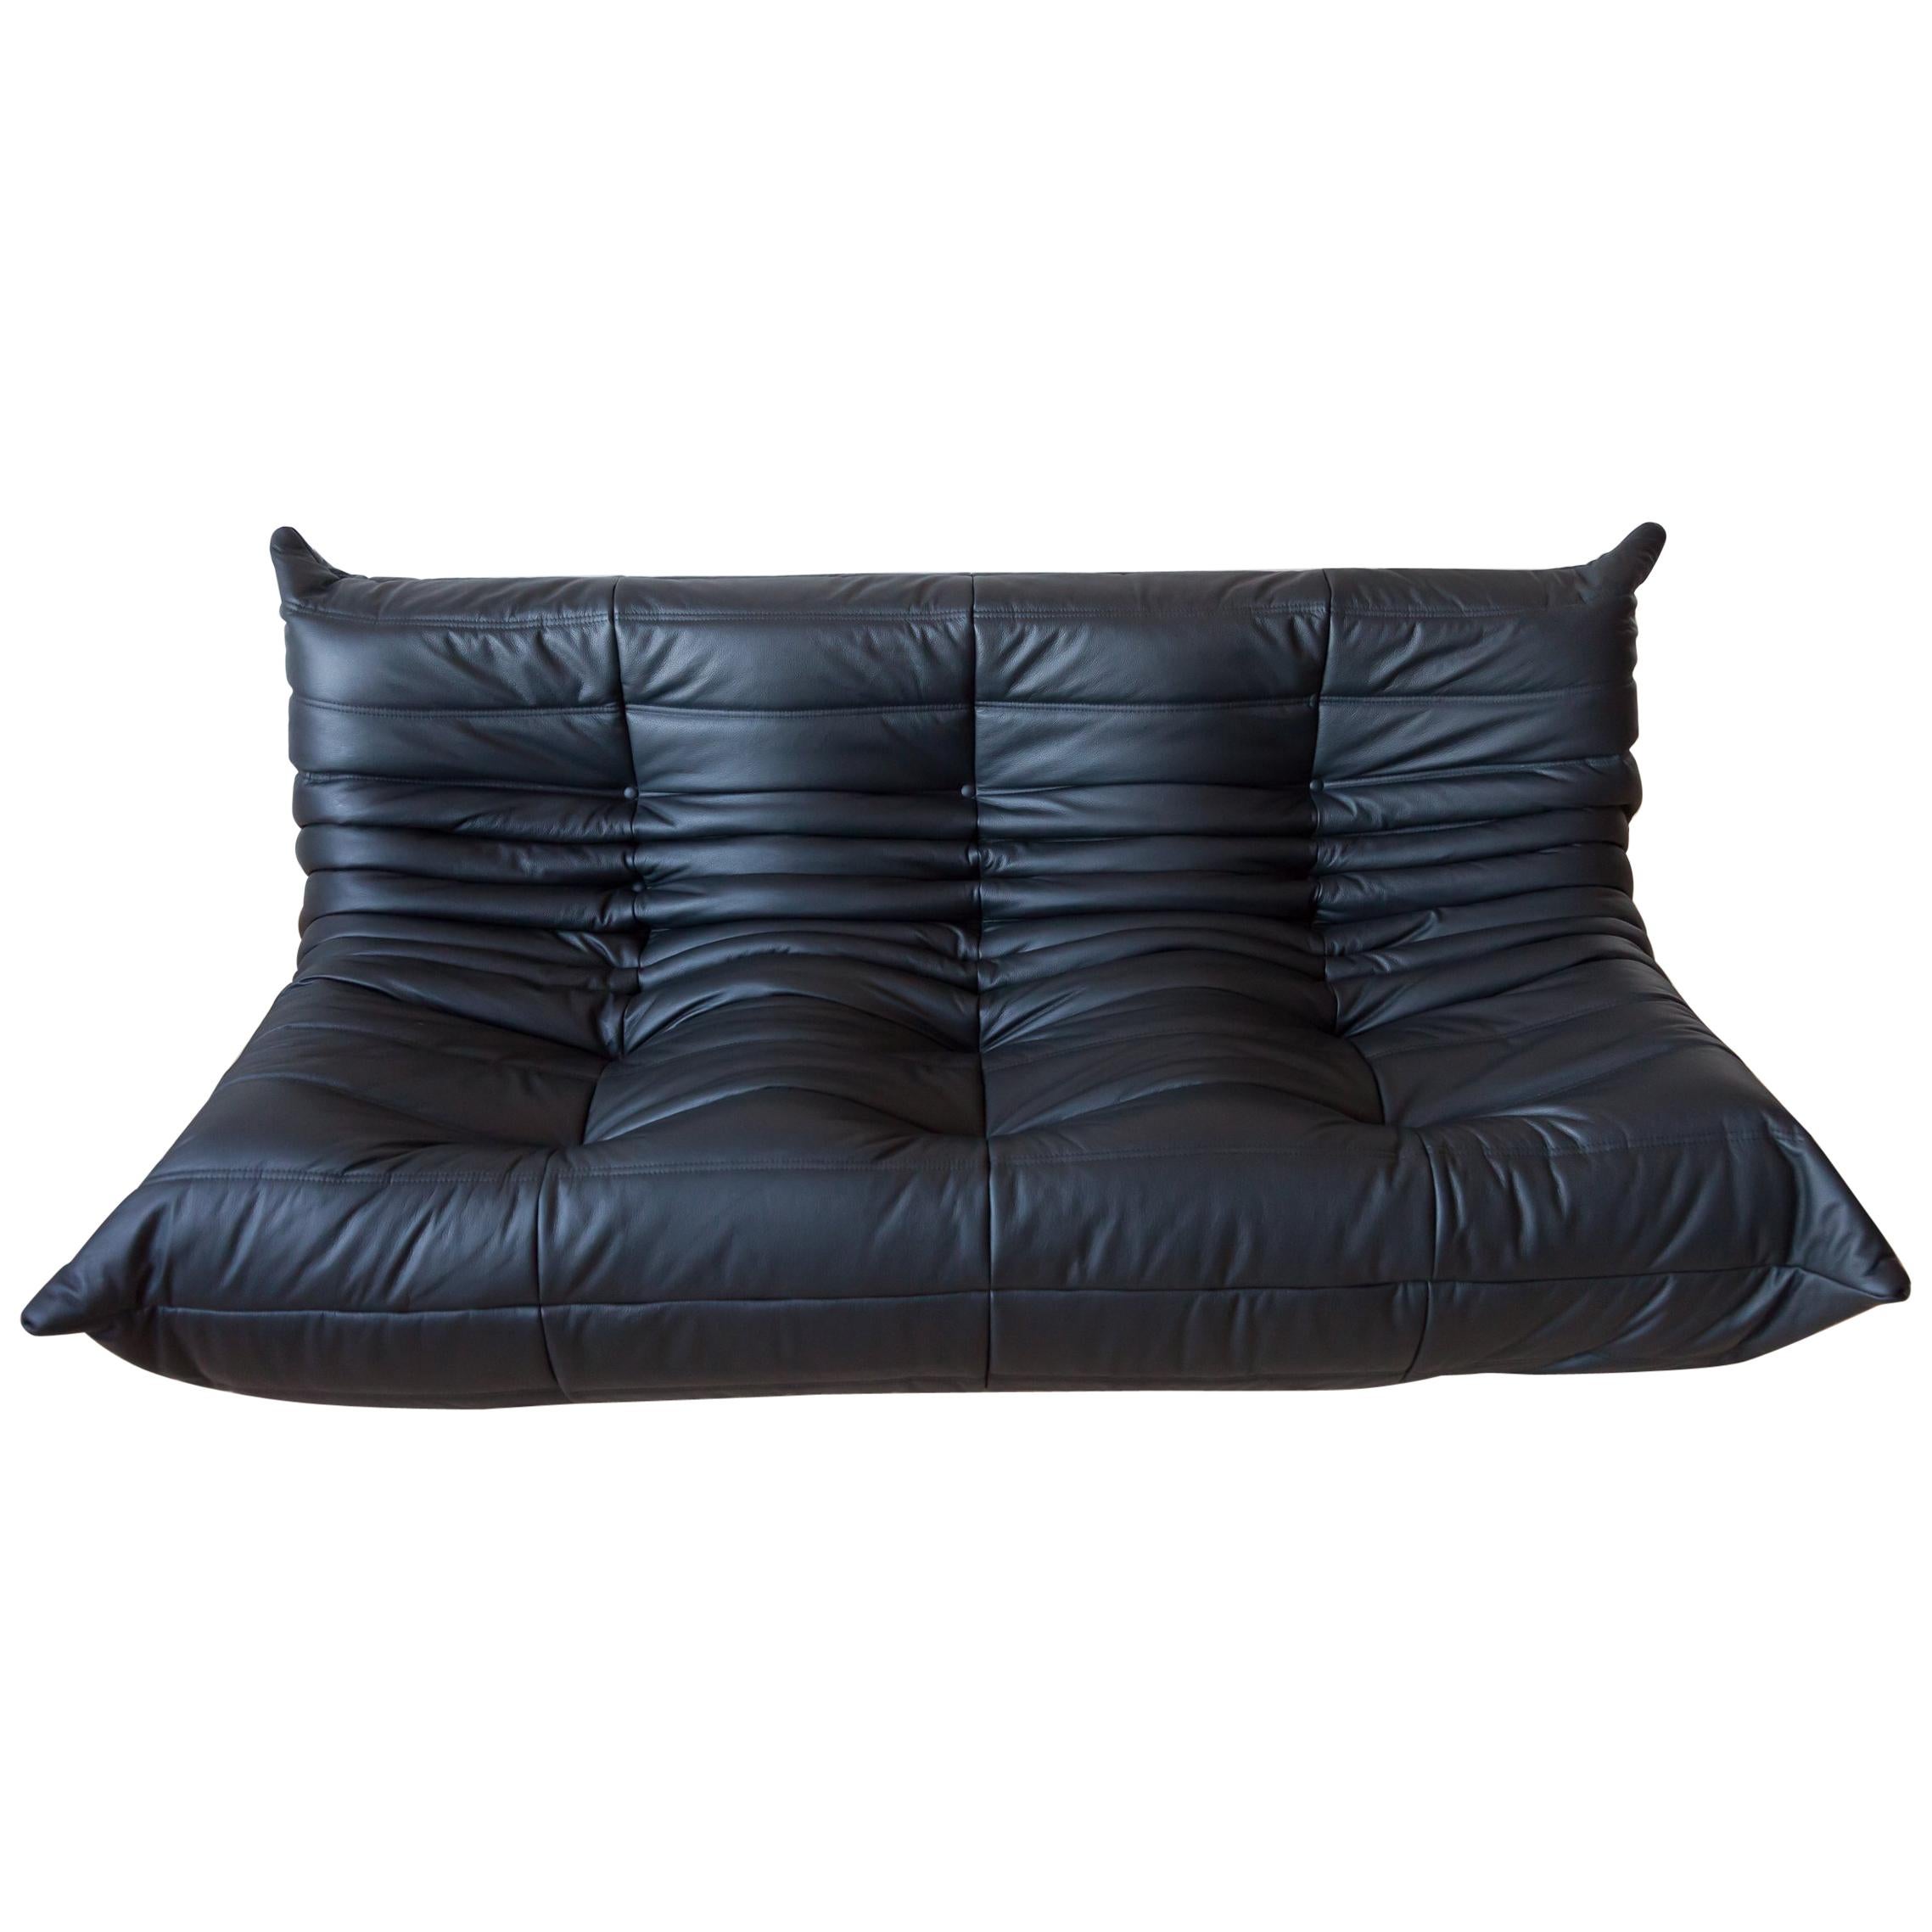 Togo 3-Seat Sofa in Black Leather by Michel Ducaroy for Ligne Roset For Sale